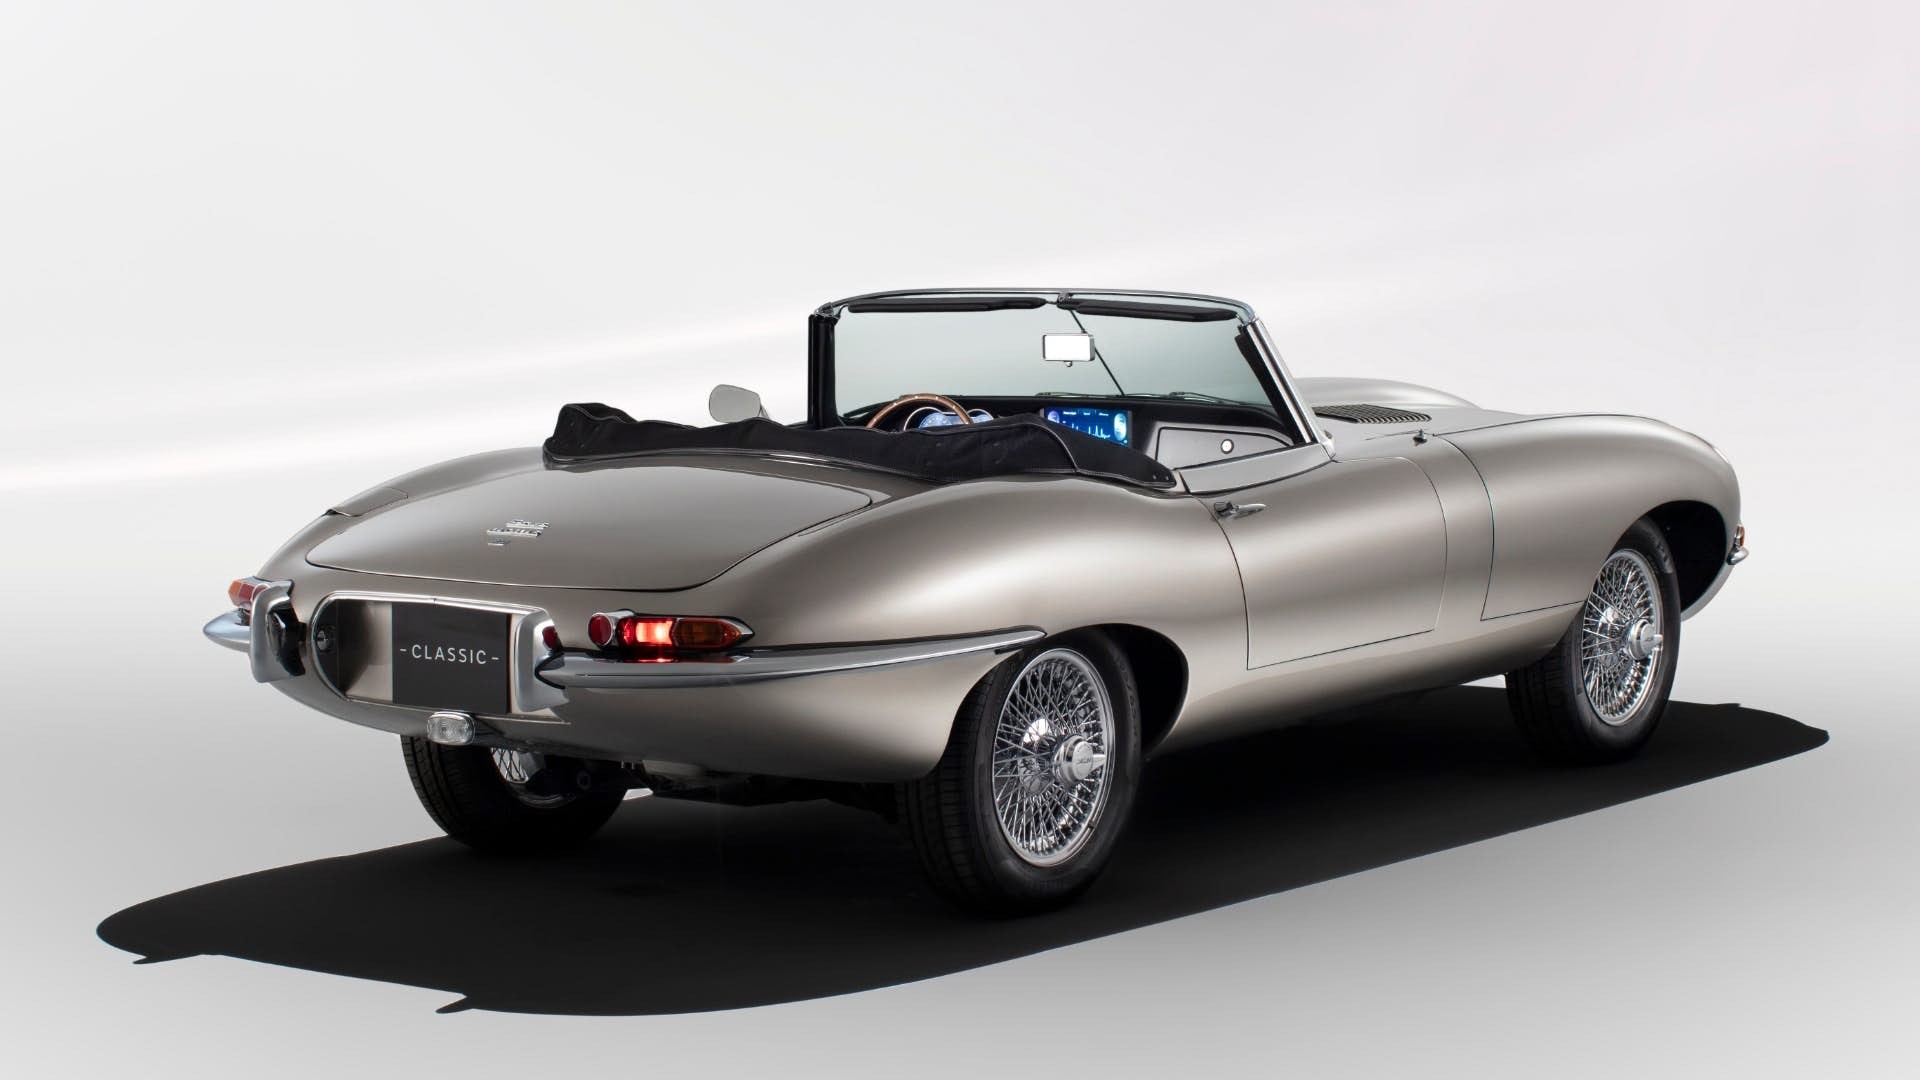 Jaguar Land Rover announces the return of the classic model – a battery-operated, emission-free version known as the E-Type Zero – which is revving up to hit the roads in the summer of 2020, with a top speed of 150mph